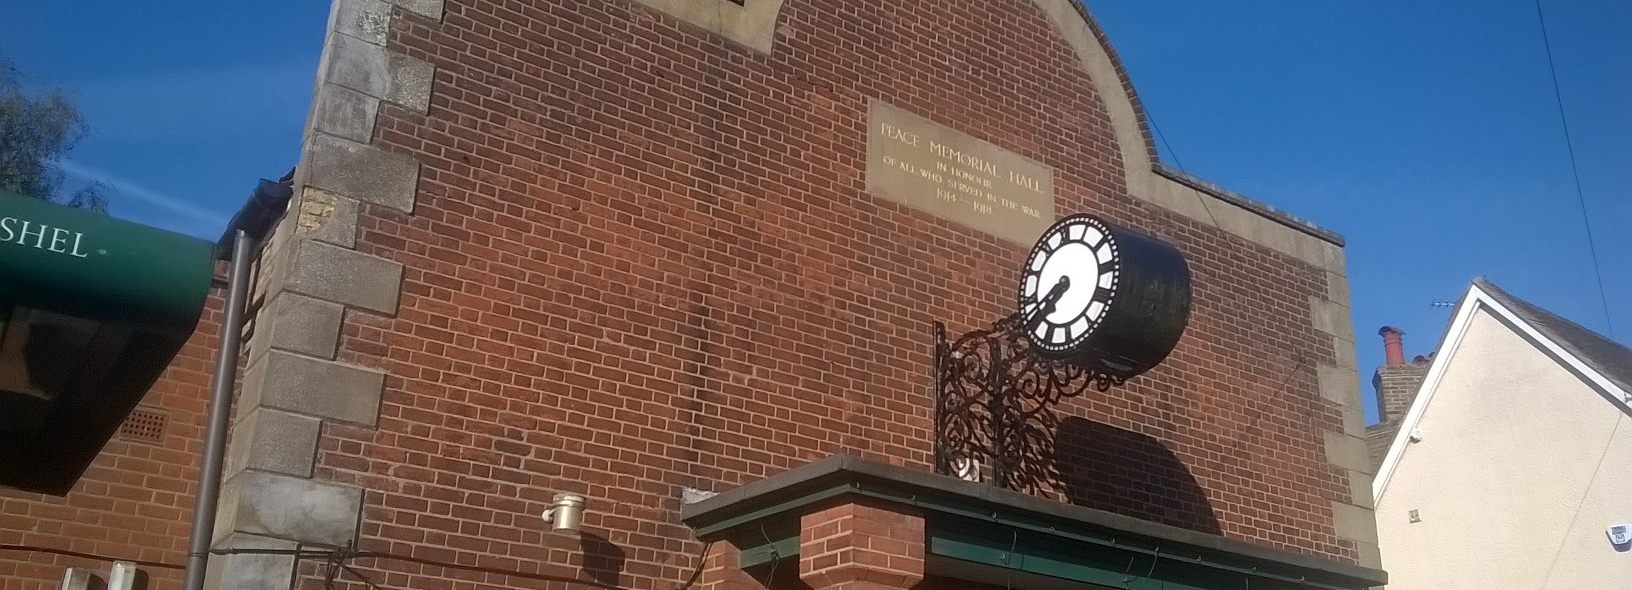 The facade of Codicote Peace Memorial Hall showing the clock